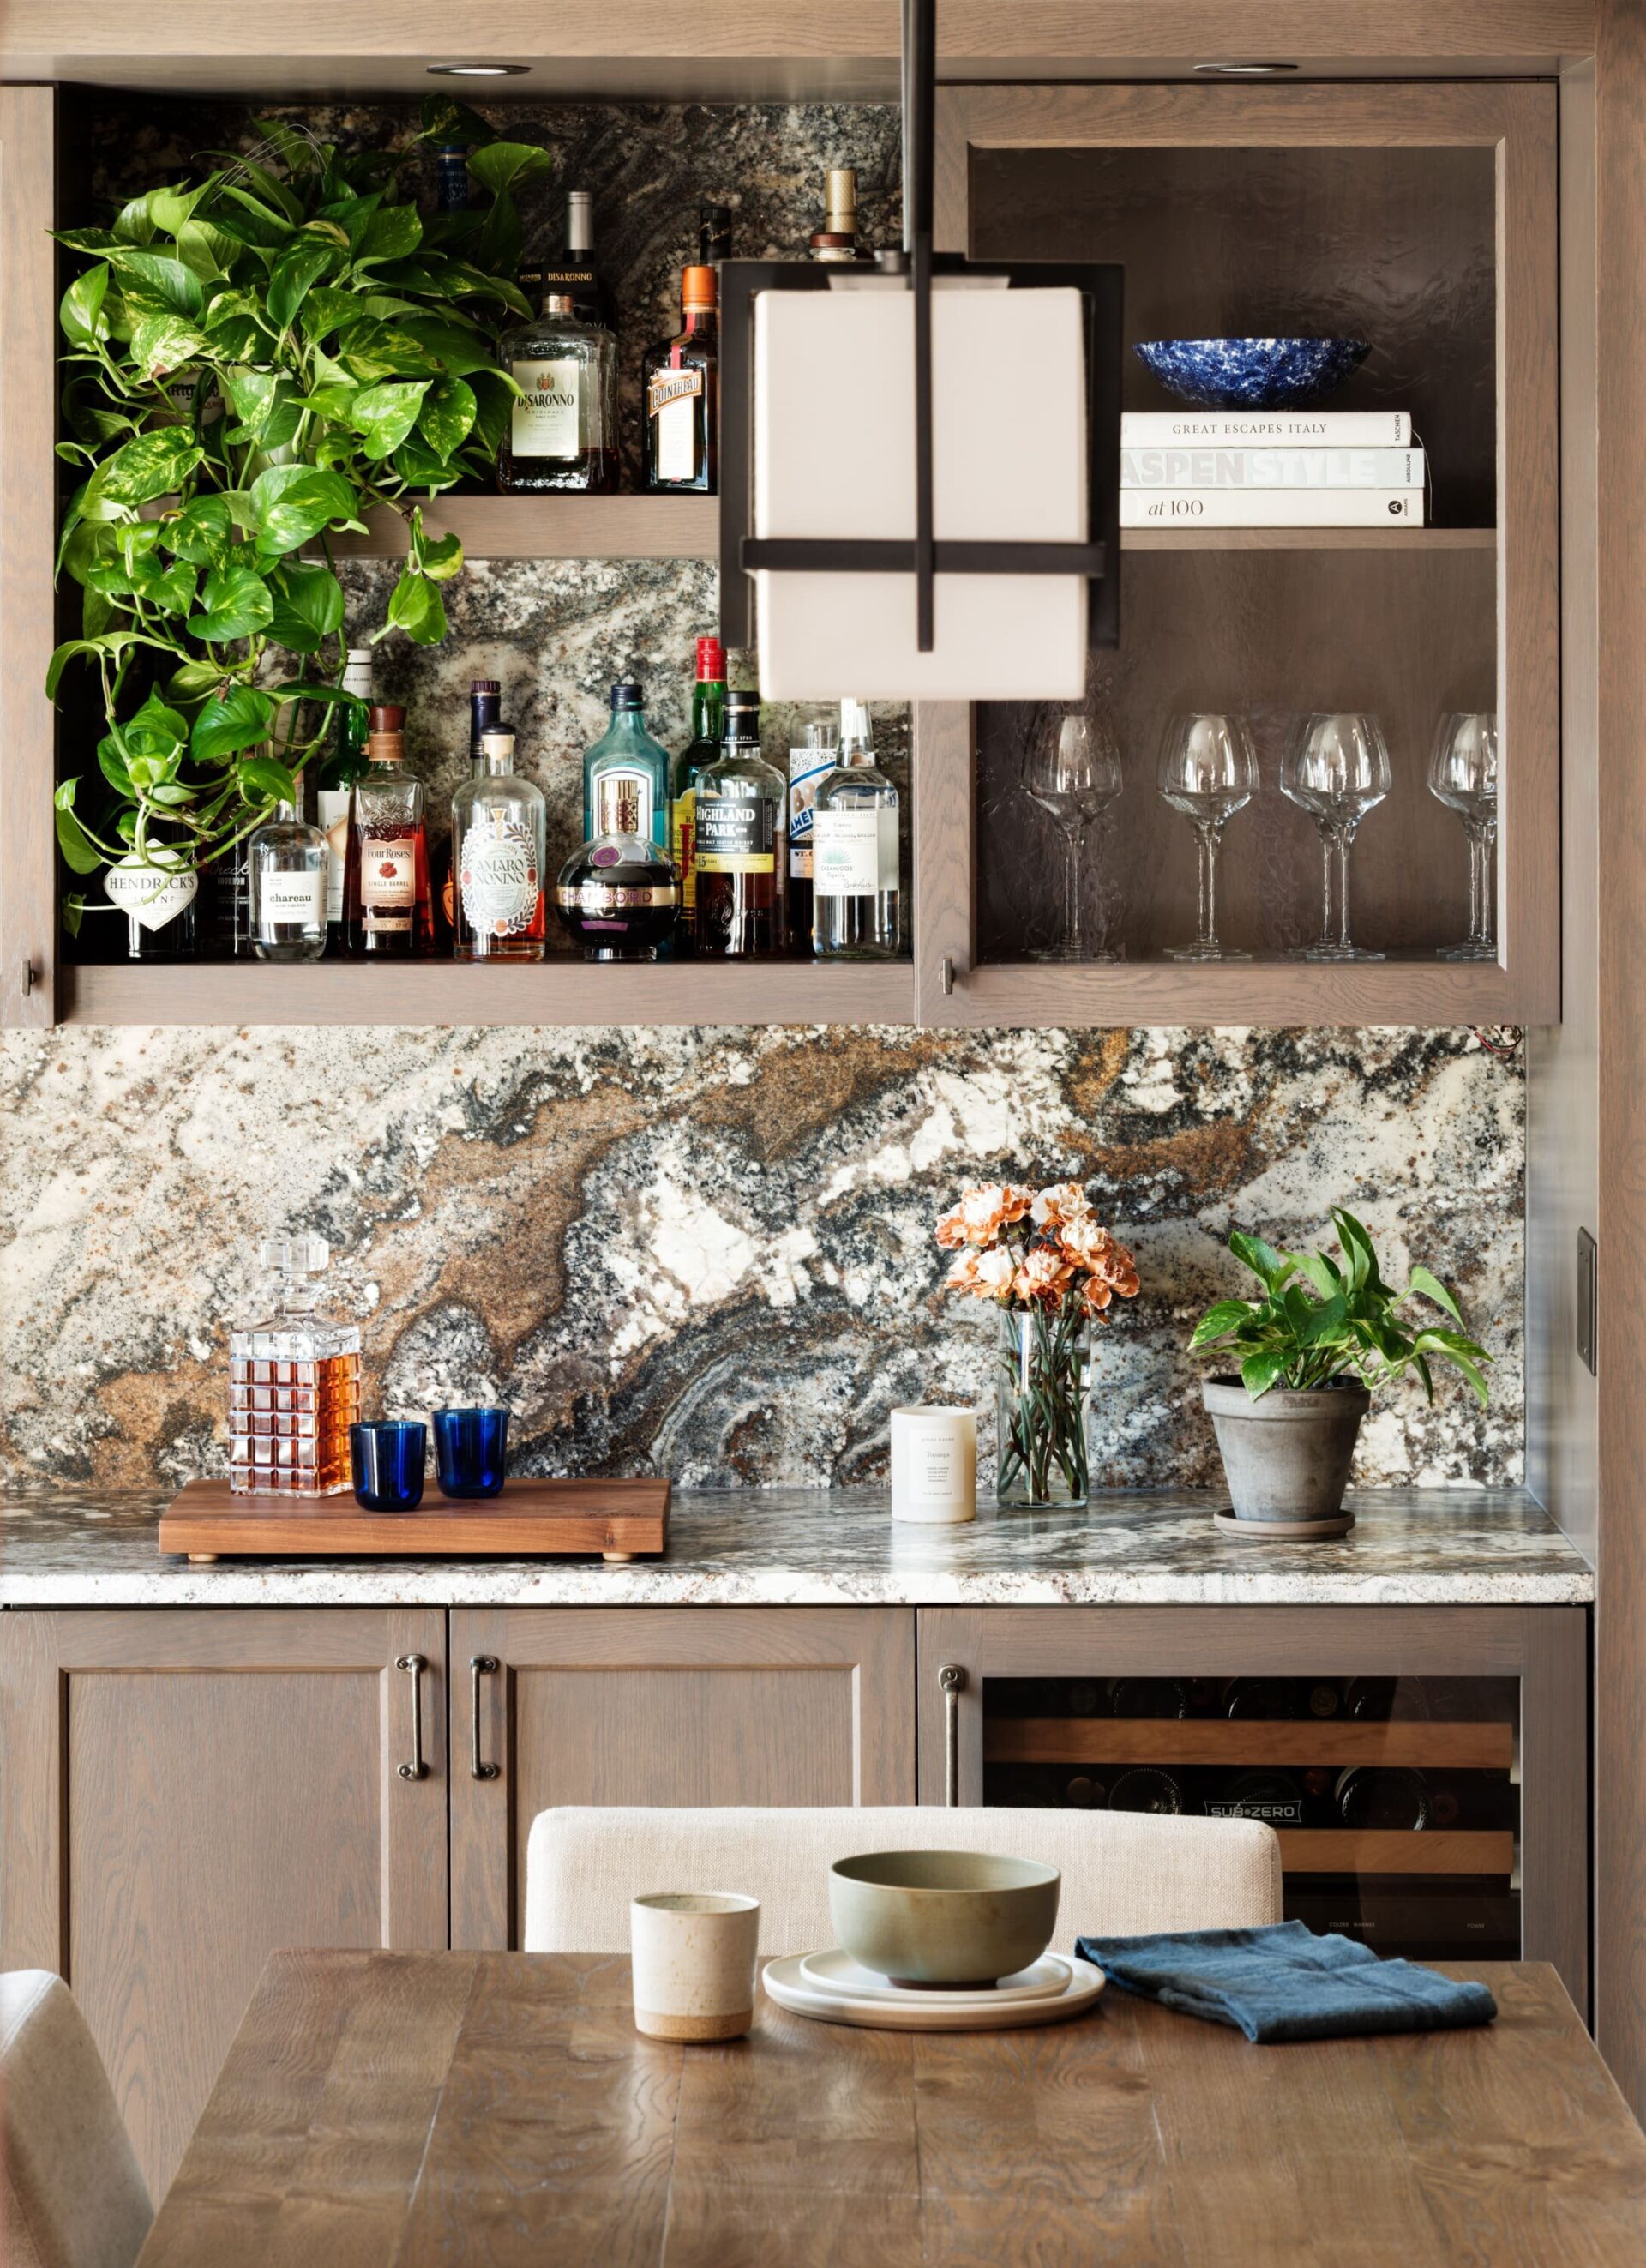 The bar area utilizes custom cabinetry and a marble backsplash